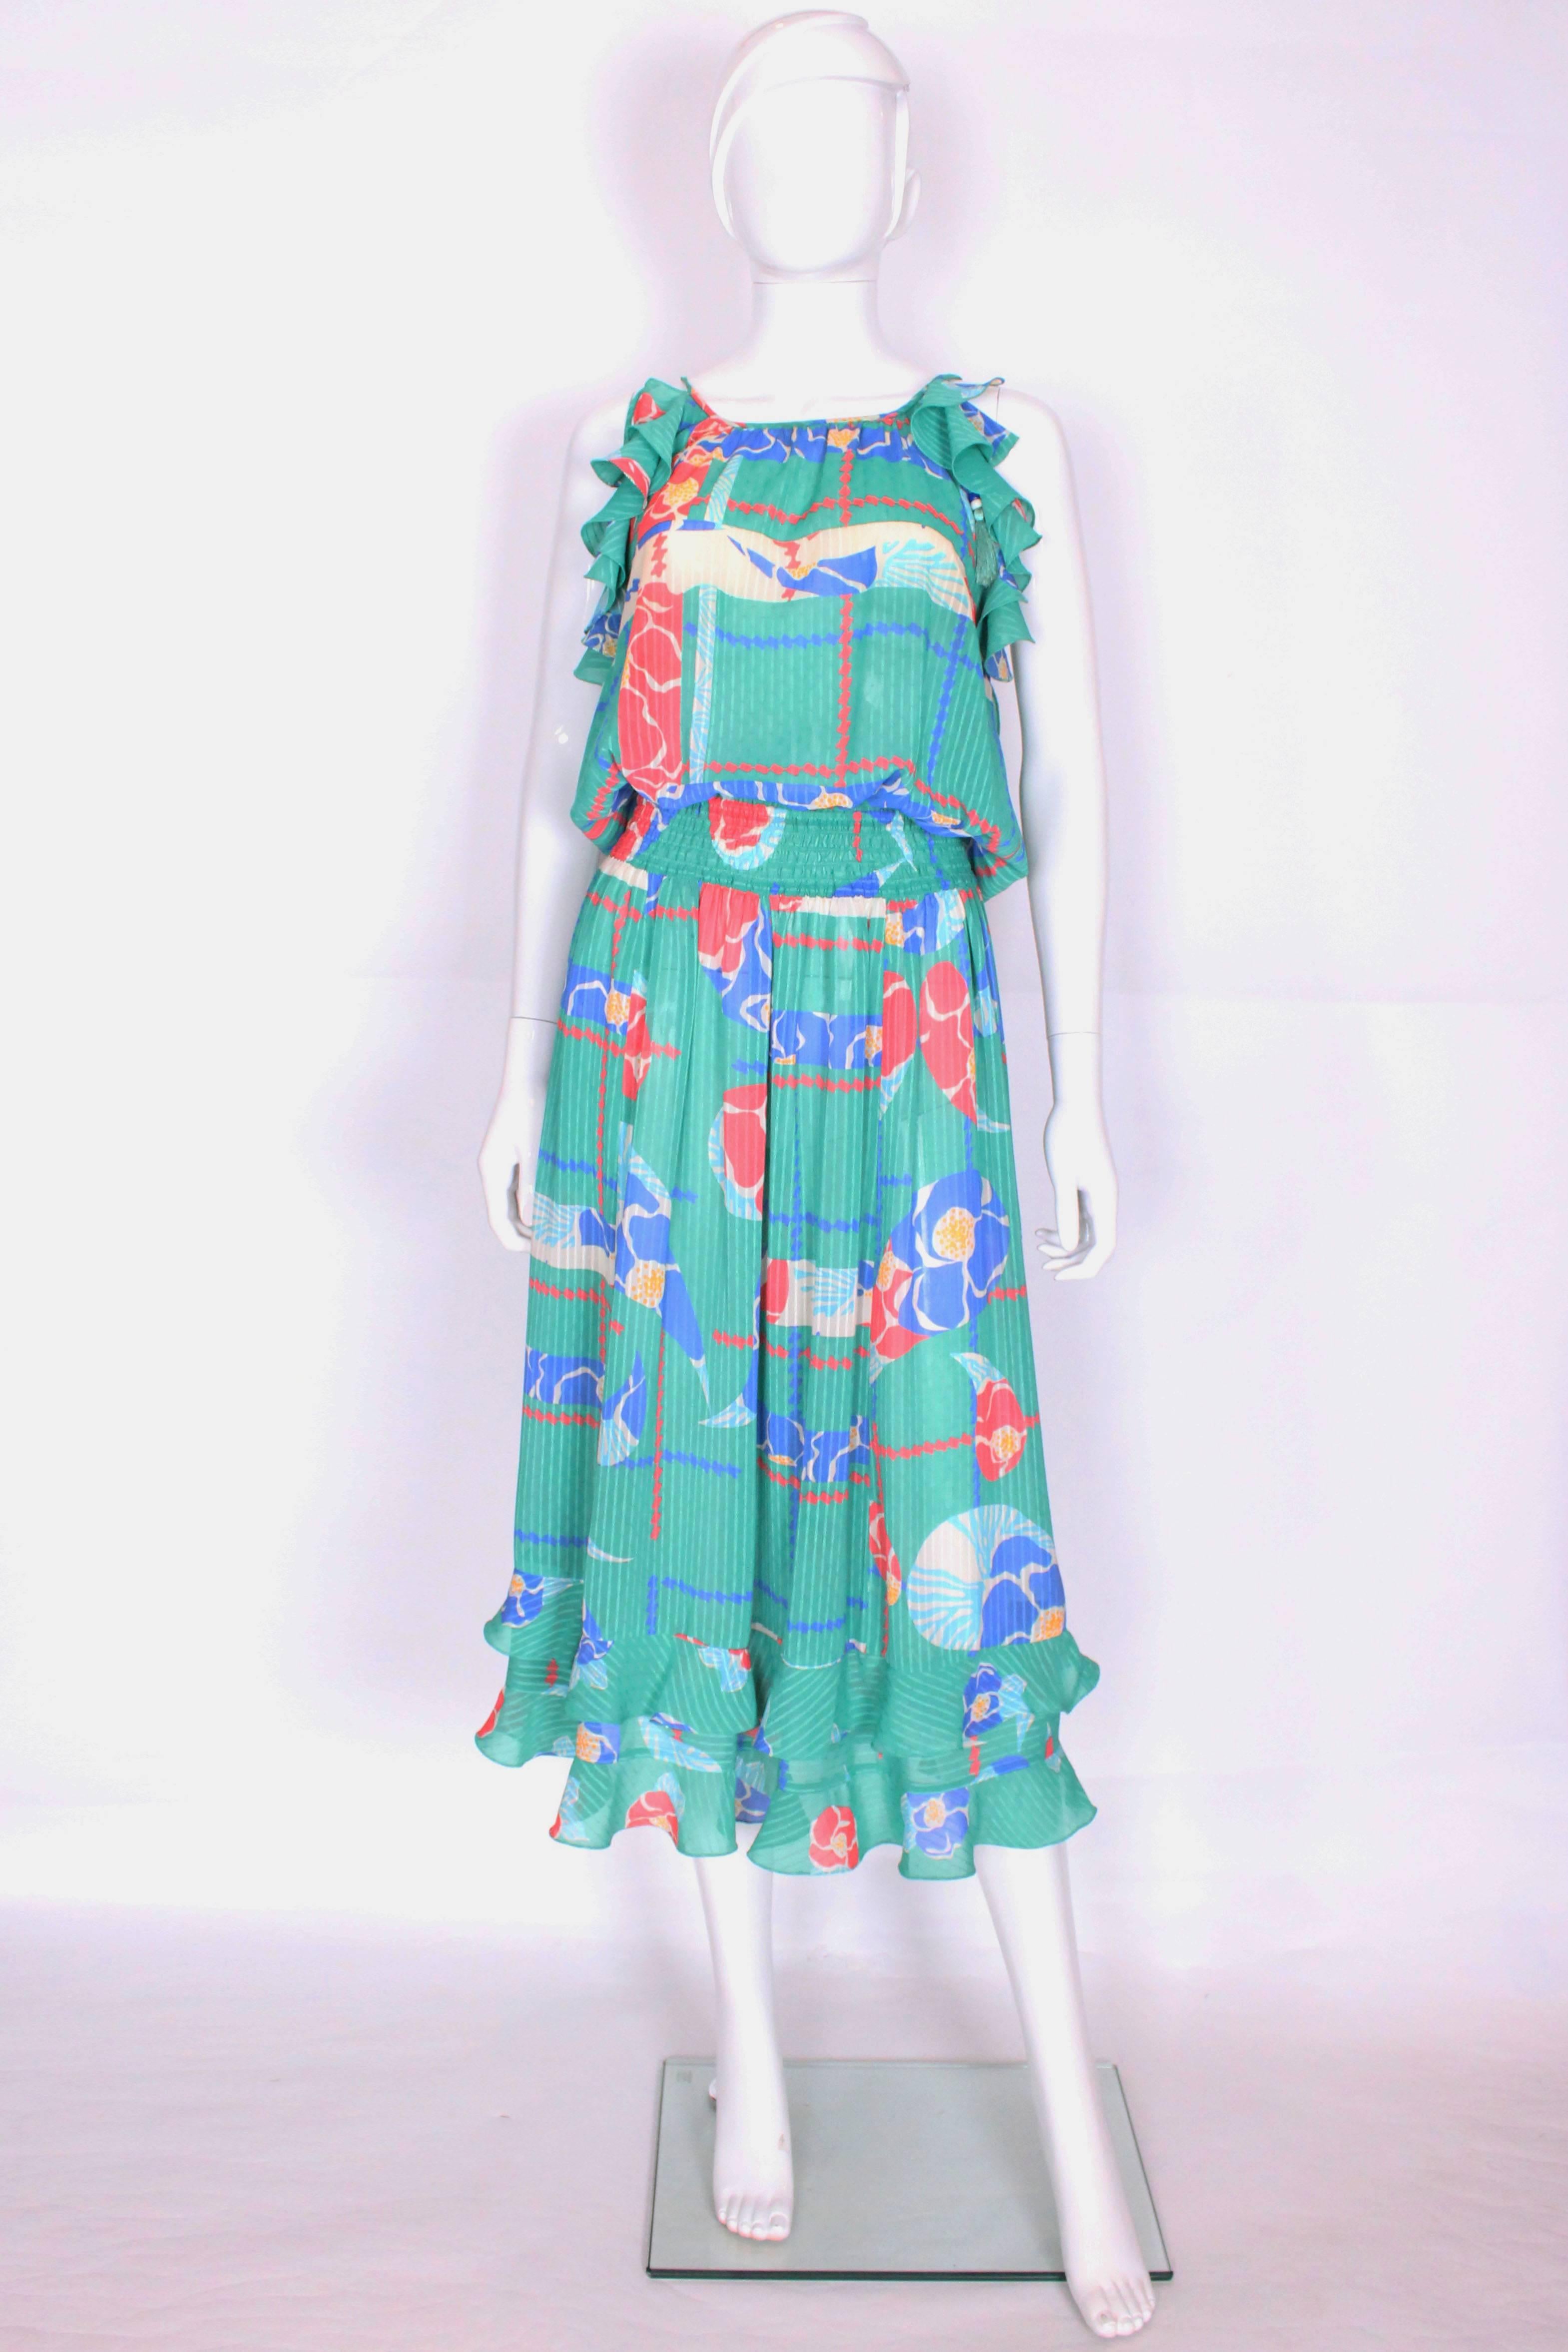 A fabulous dress by Diane Fres. This dress has a sea green background with stripe detail, and a floral print in salmon pink,blue and ivory. The dress has an elasticated waist for easy wear, and two rows of frills at the hem, and armholes.
It doesnt 